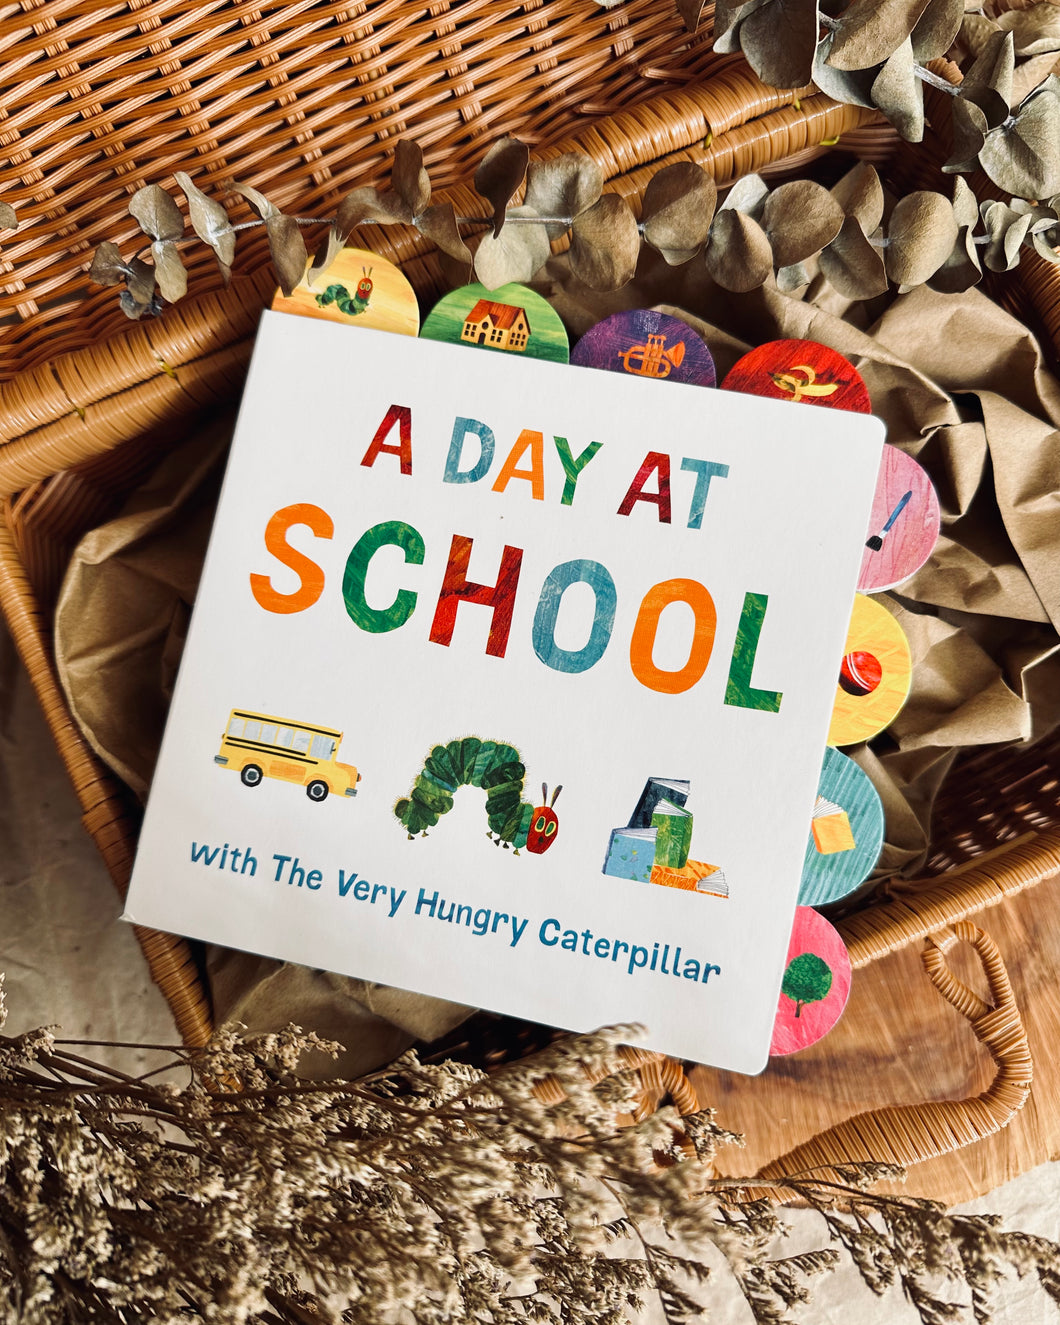 A Day at School with the Very Hungry Caterpillar (By Eric Carle)